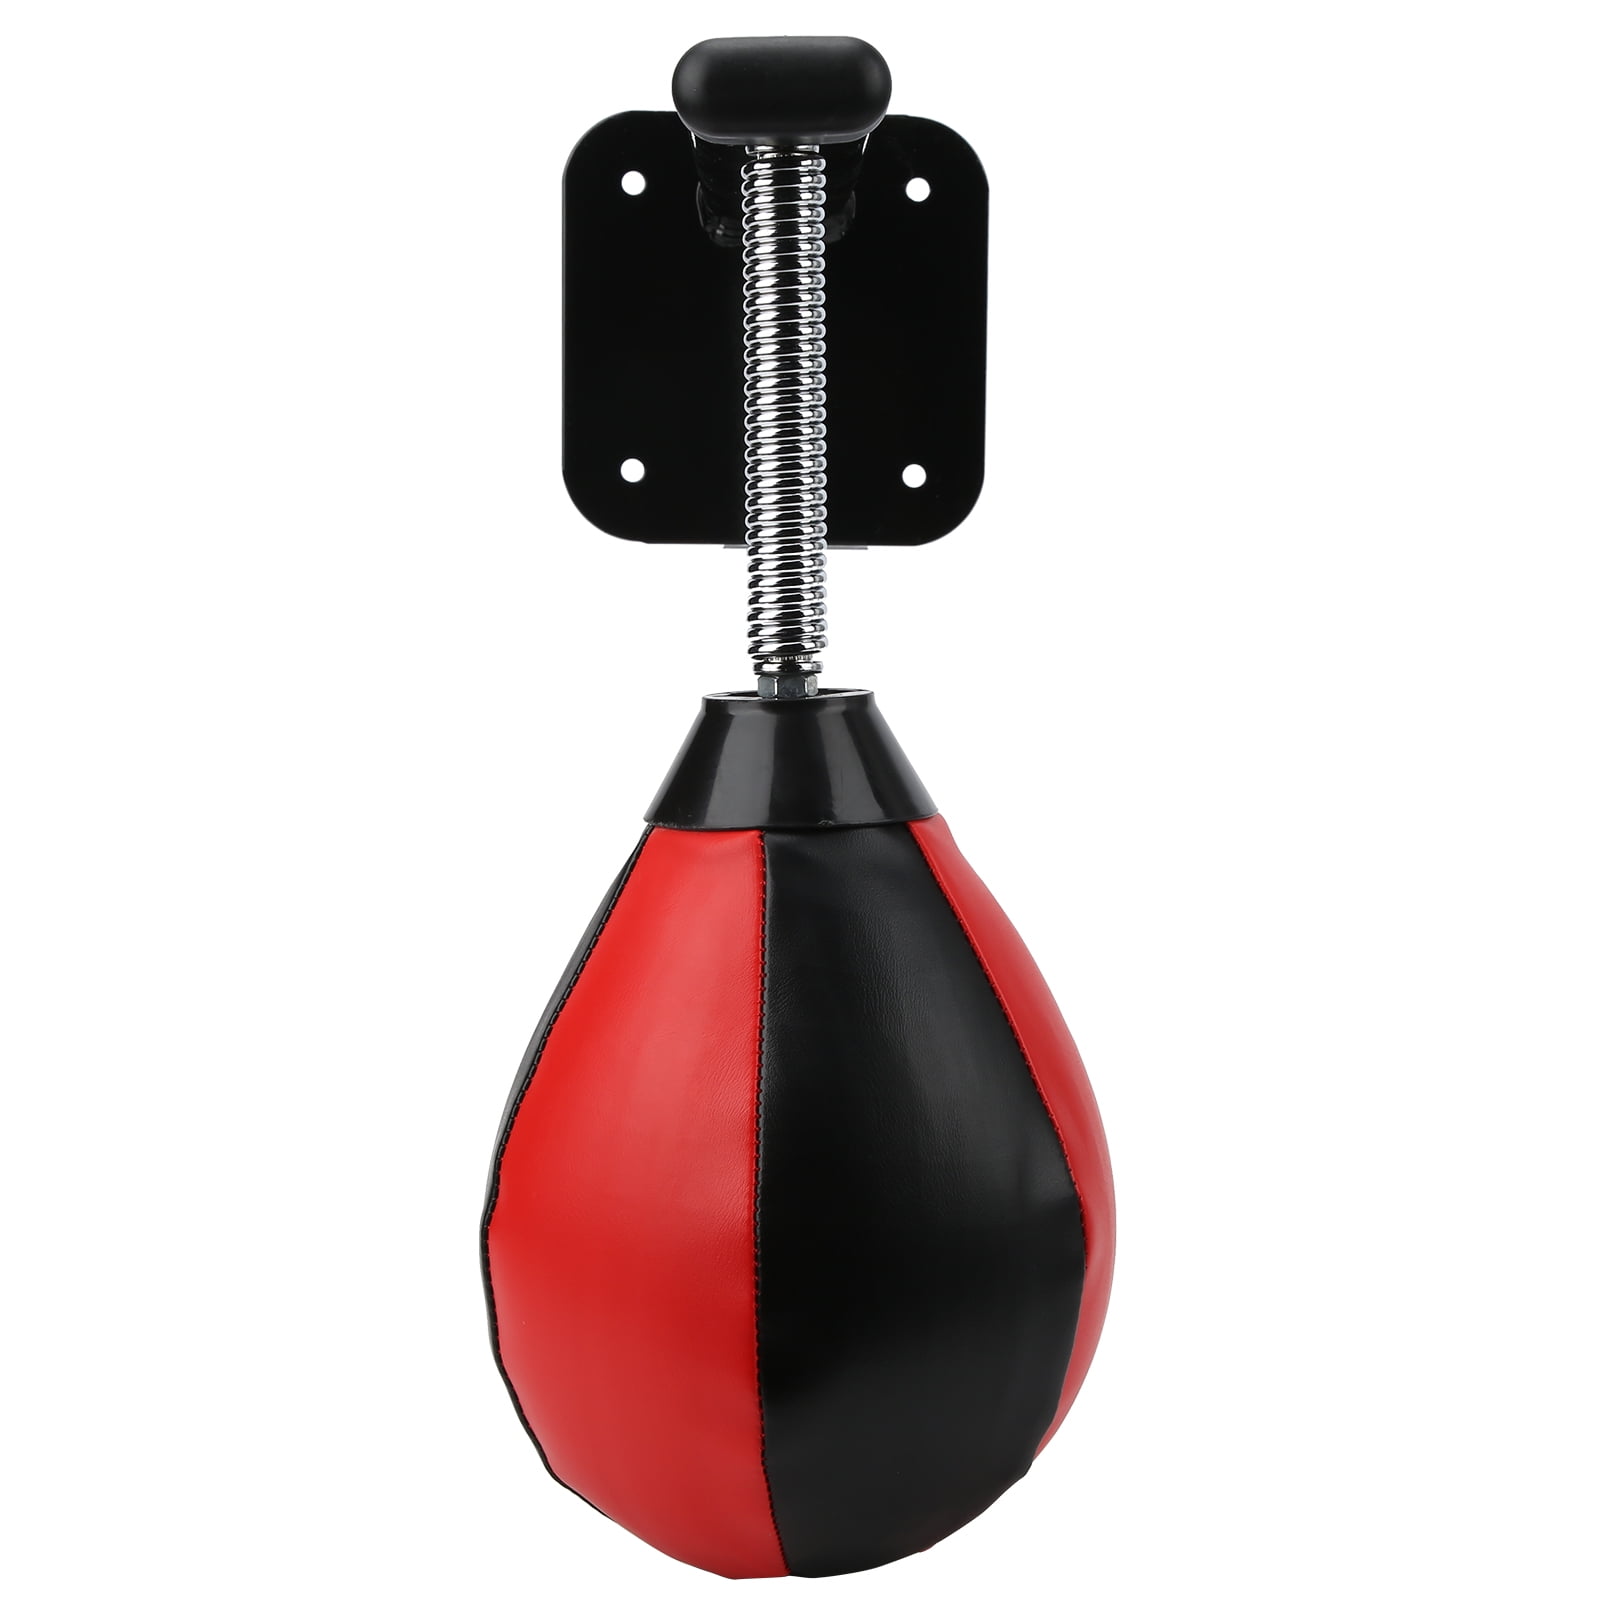  KDKDA Fitness Boxing Punching Bag Hanging Hollow self-Filling  Hand and Foot Pressure Relief sandbag Bag self-Installing Wall-Mounted  Exercise (Size : 120x33cm) : Sports & Outdoors